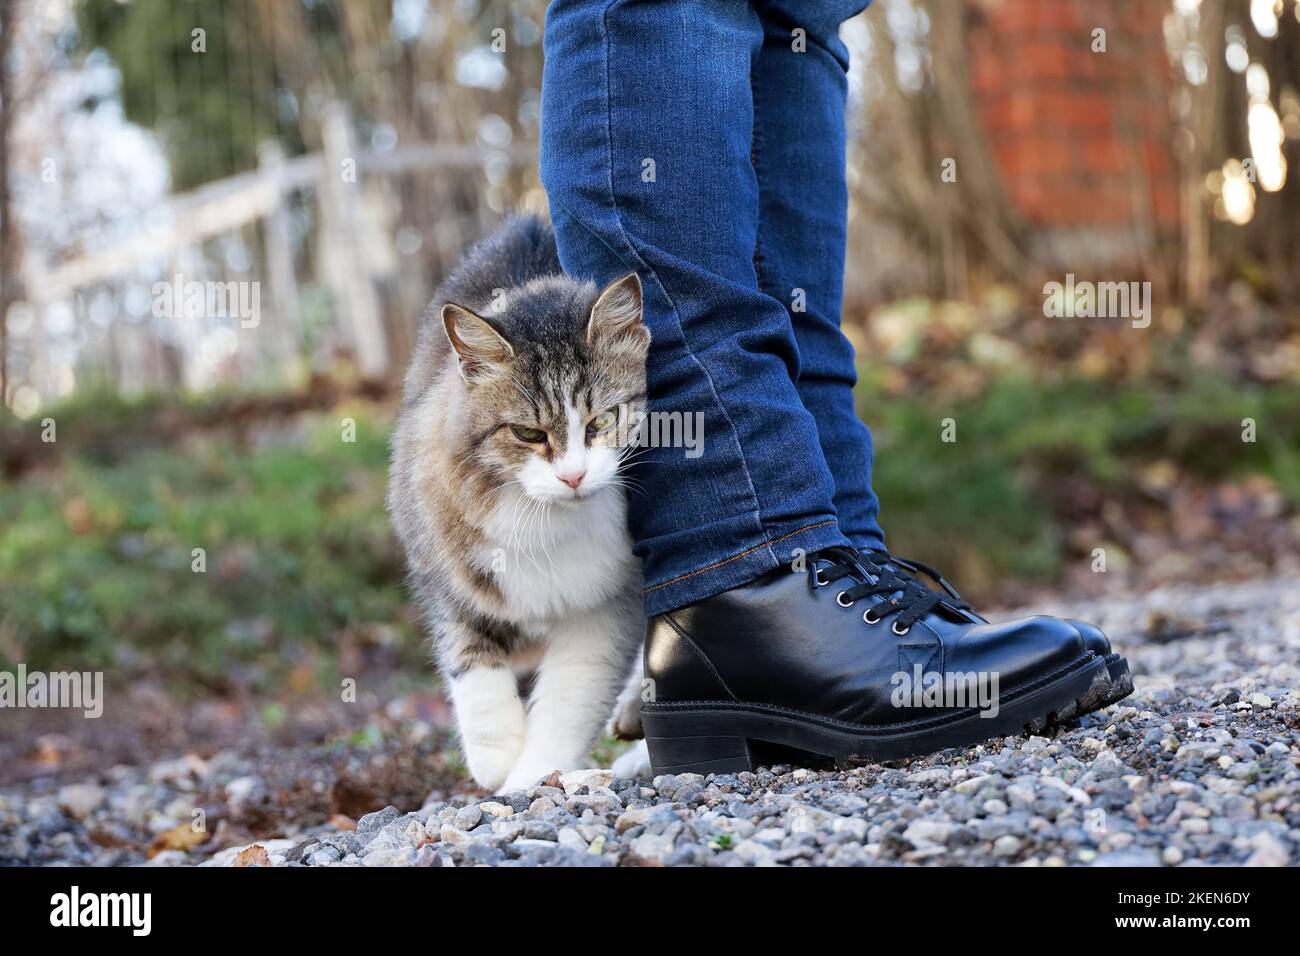 Cat rubs against female legs in jeans on autumn street. Pet fawning over a woman Stock Photo